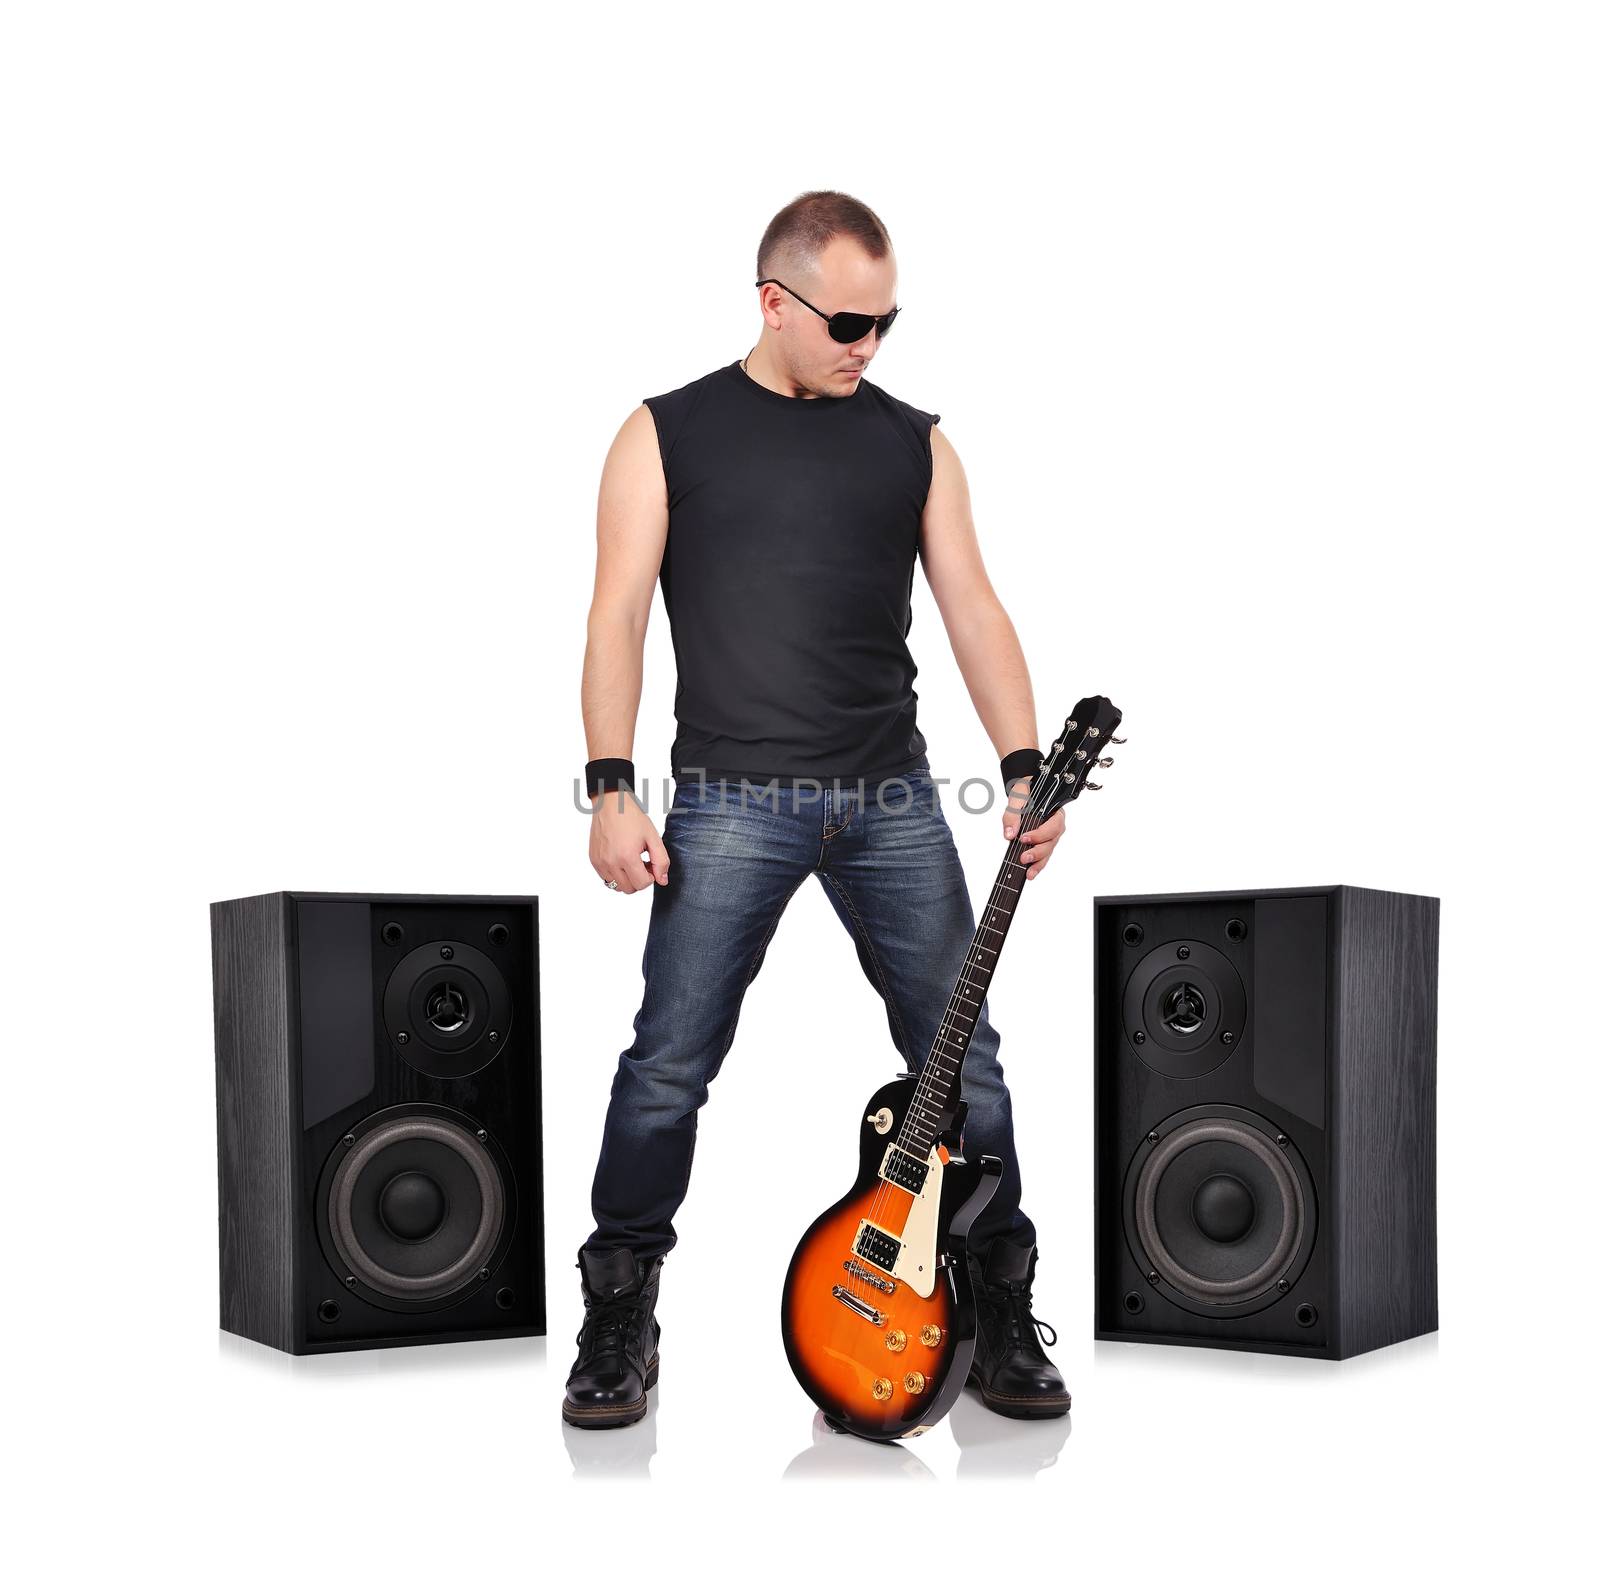 rock musician holding electrical guitar and big speakers